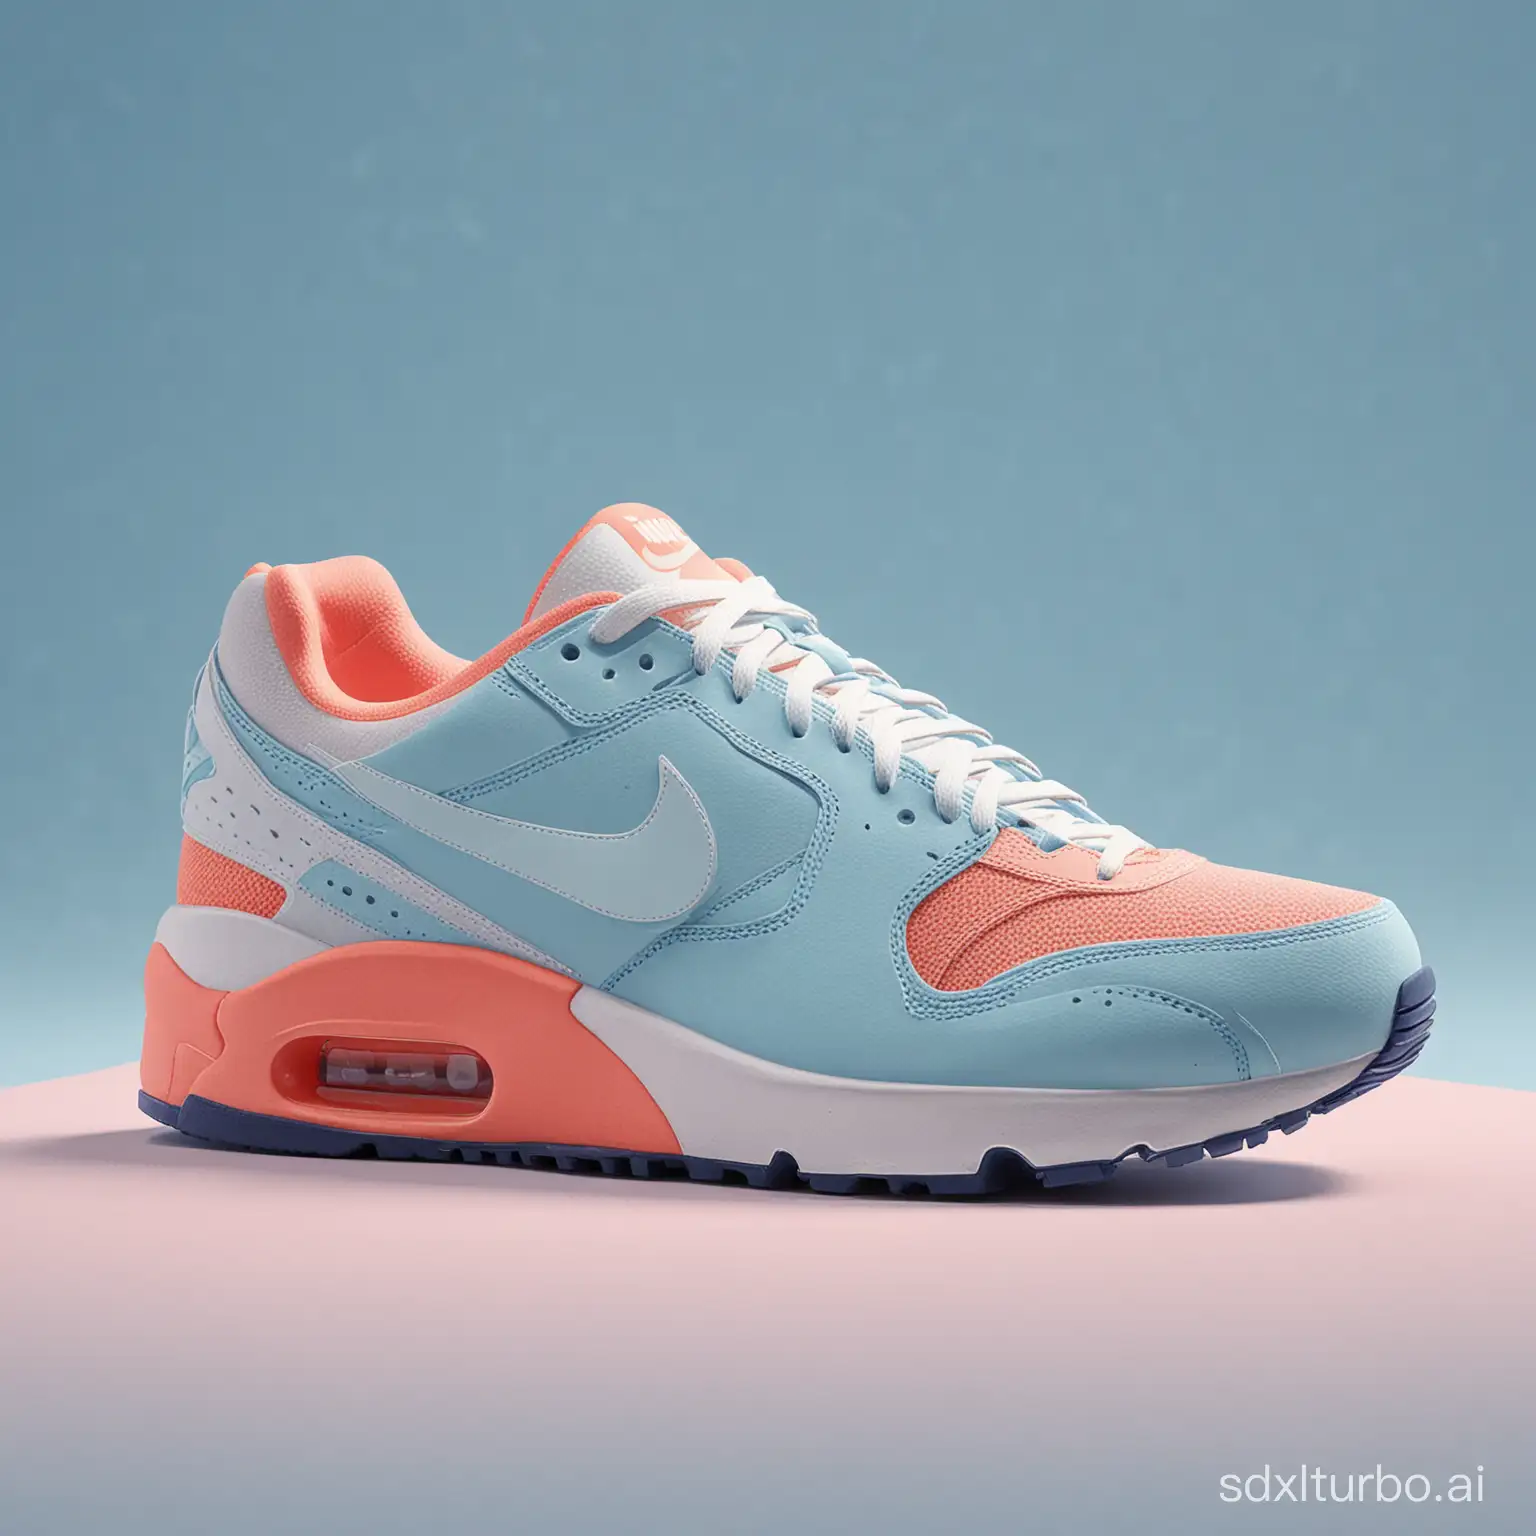 Product shot of nike shoes,with soft
vibrant colors,3d blender render,modular
constructivism,blue background,
physically based rendering,centered